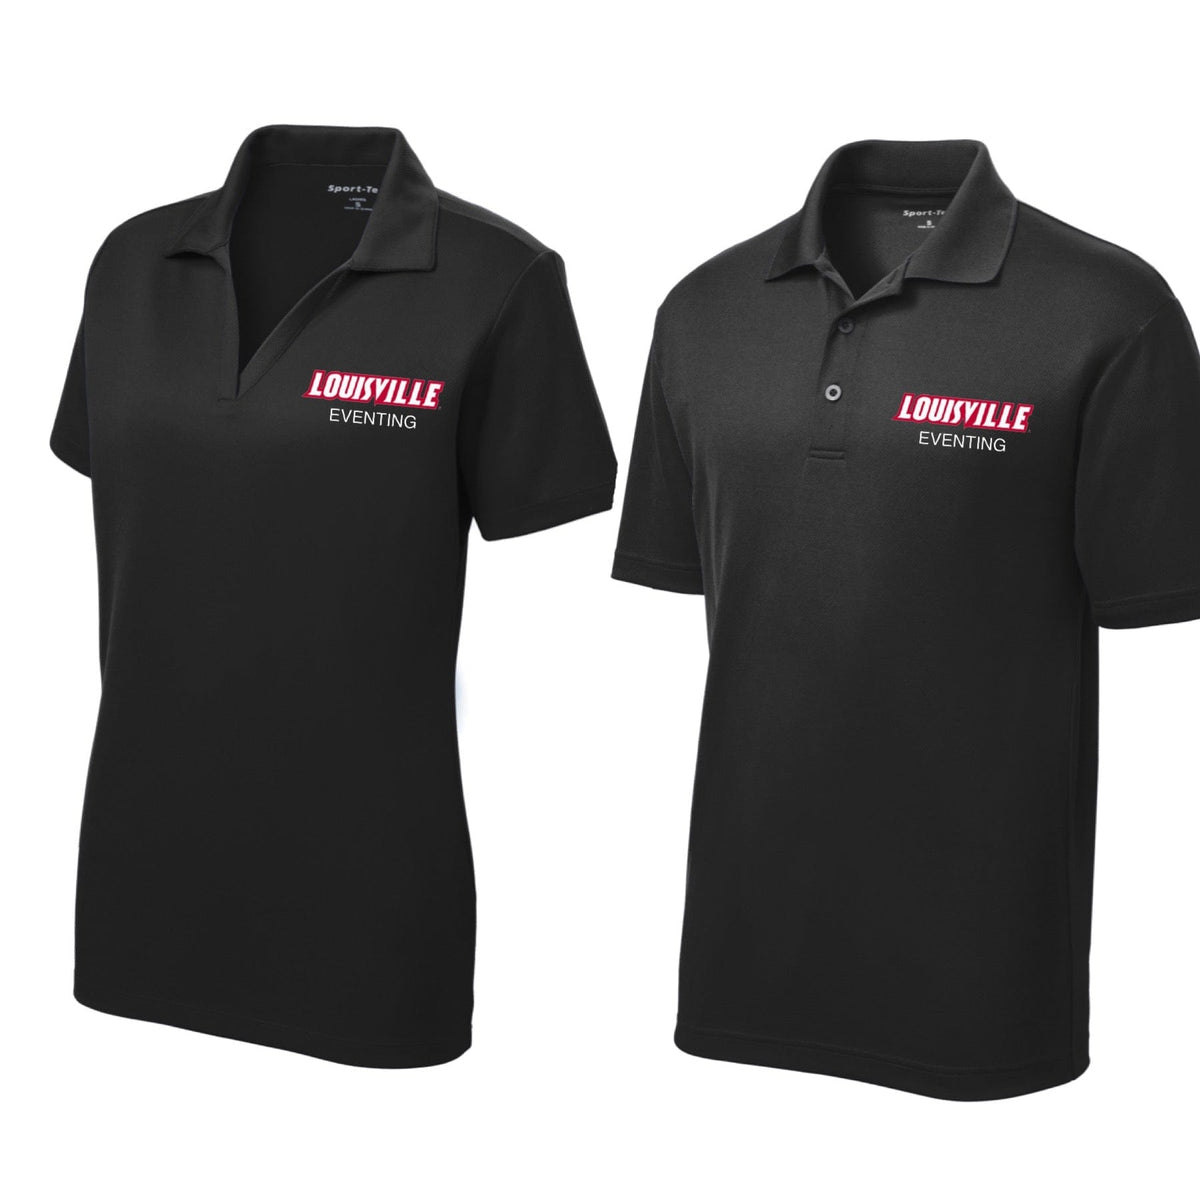 Equestrian Team Apparel Louisville Equestrian Team- Polo equestrian team apparel online tack store mobile tack store custom farm apparel custom show stable clothing equestrian lifestyle horse show clothing riding clothes horses equestrian tack store